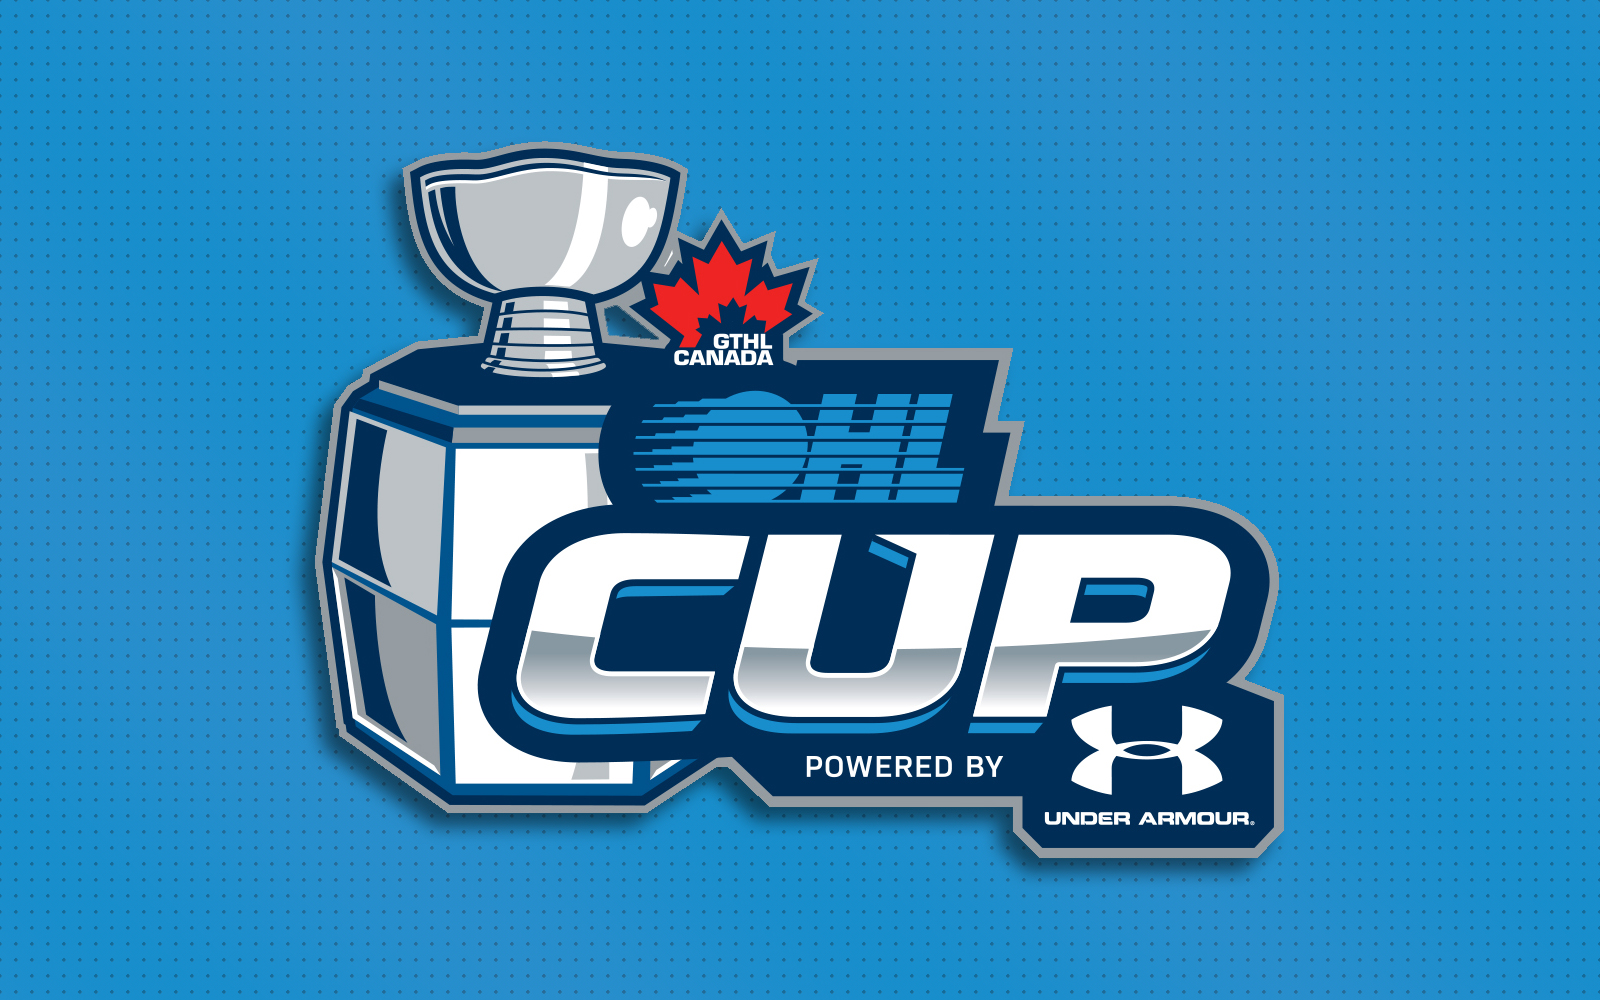 Generic OHL Cup Post Image